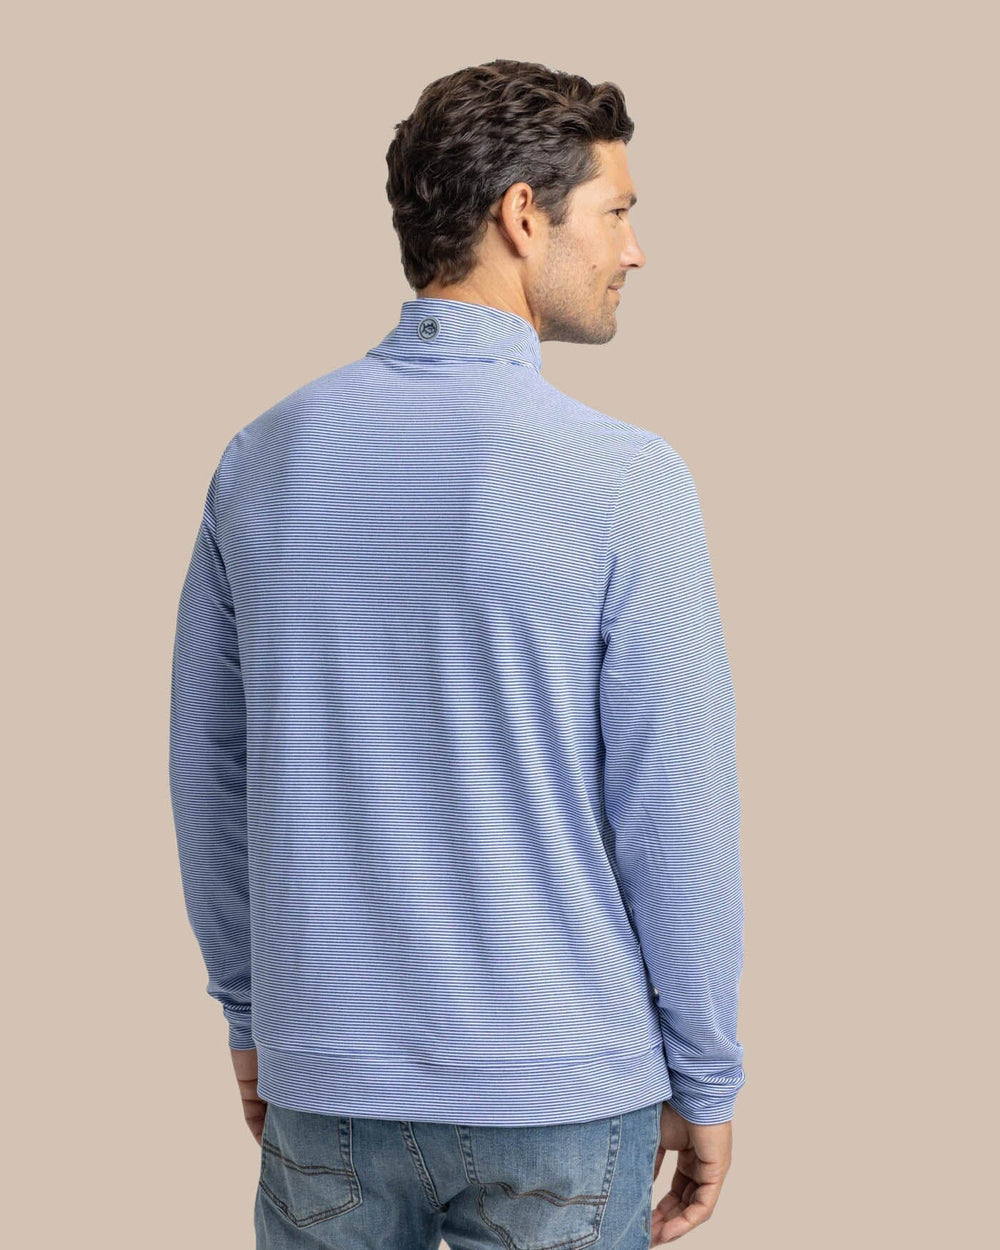 The back view of the Southern Tide Cruiser Micro-Stripe Heather Quarter Zip by Southern Tide - Heather University Blue